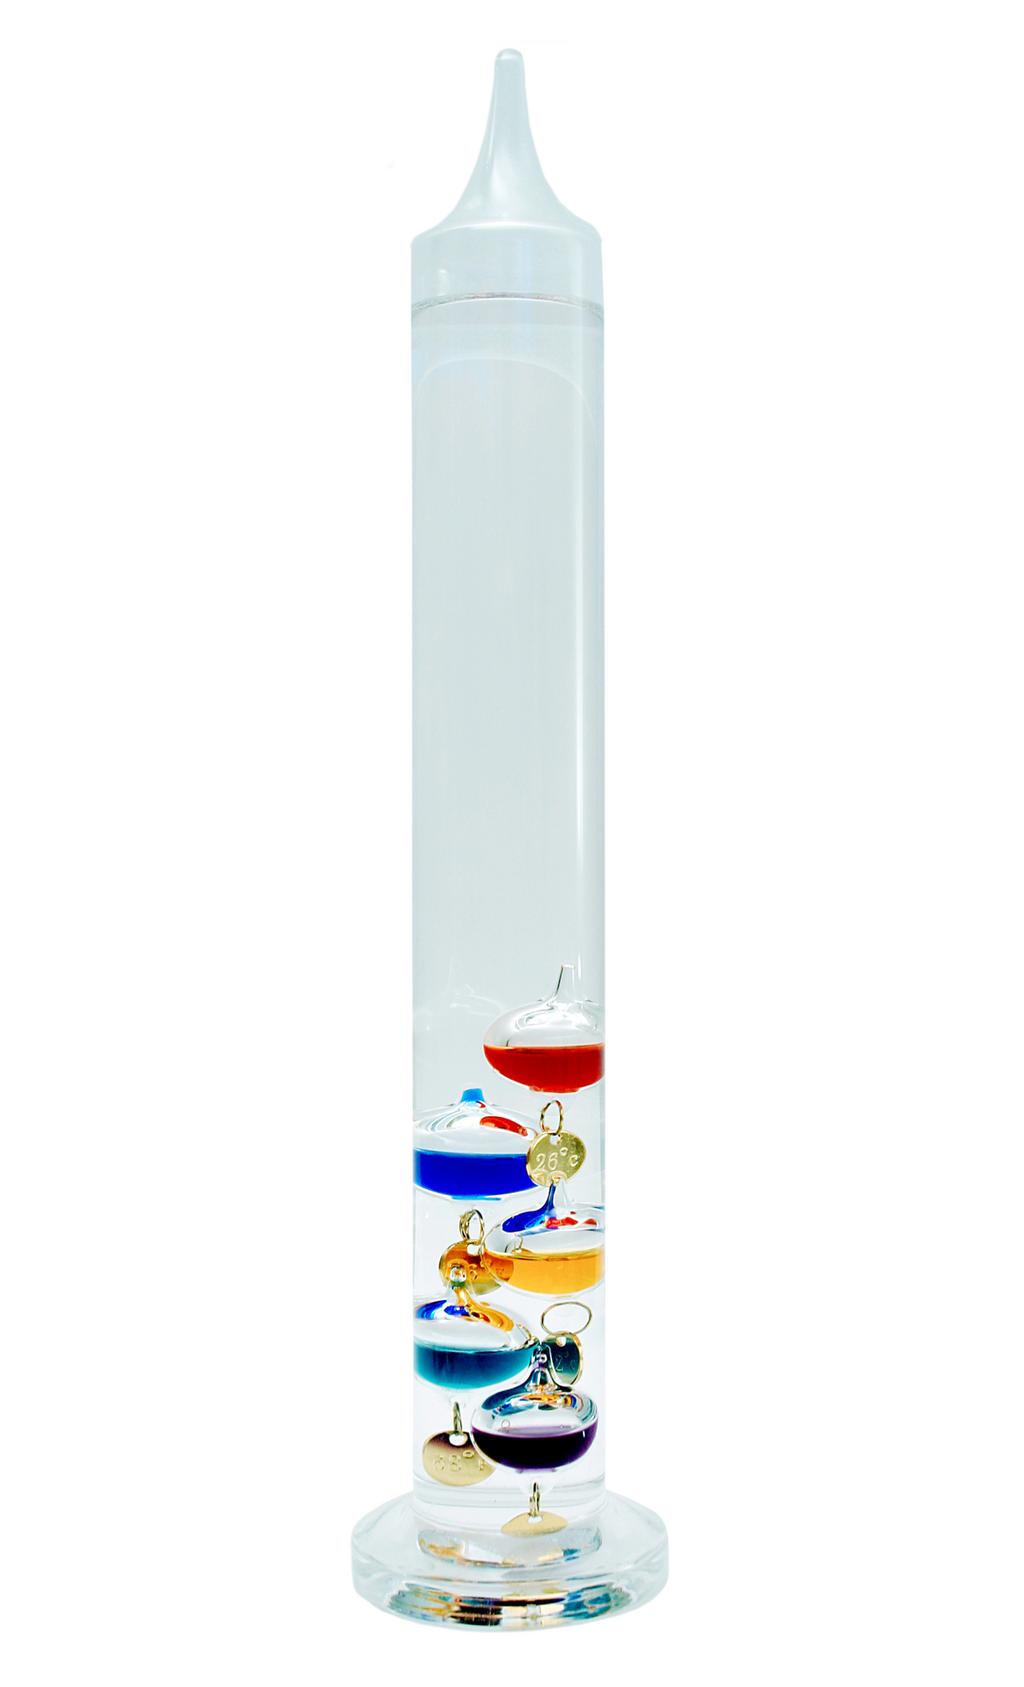 37. A photograph of a Galileo thermometer is shown in Figure 13.9. Explain how such a thermometer works. What property of the liquid inside the thermometer is being exploited in this thermometer? 38.